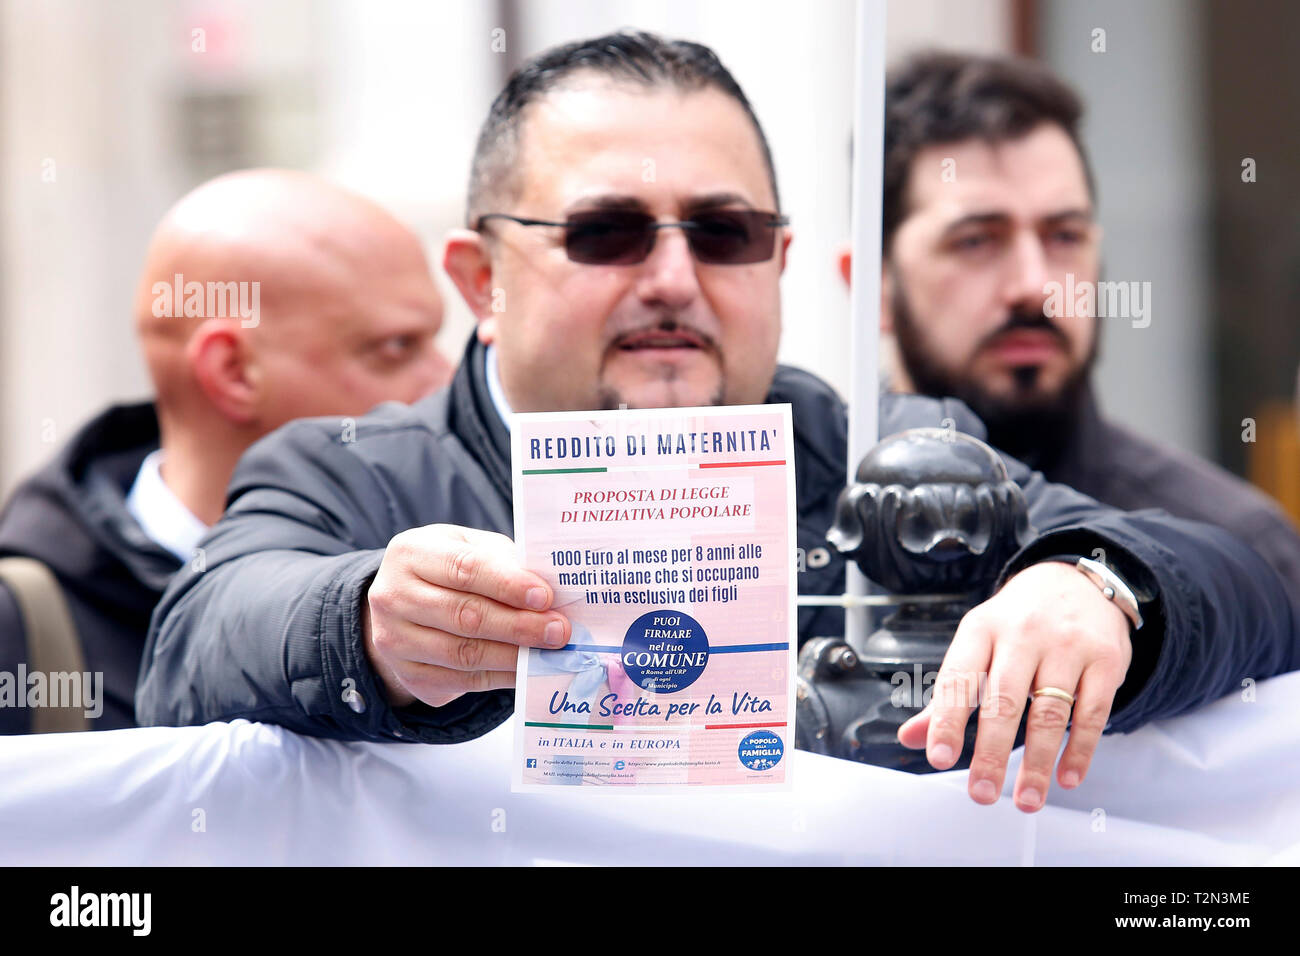 A man showing a law propose, that wants to give women 1000E per month for 8 years to Italian women that don't work to take care exclusively of their children  Rome April 4th 2019. Demonstration of the People of Family. People of Family is a social conservative political movement in Italy. photo di Samantha Zucchi/Insidefoto Stock Photo